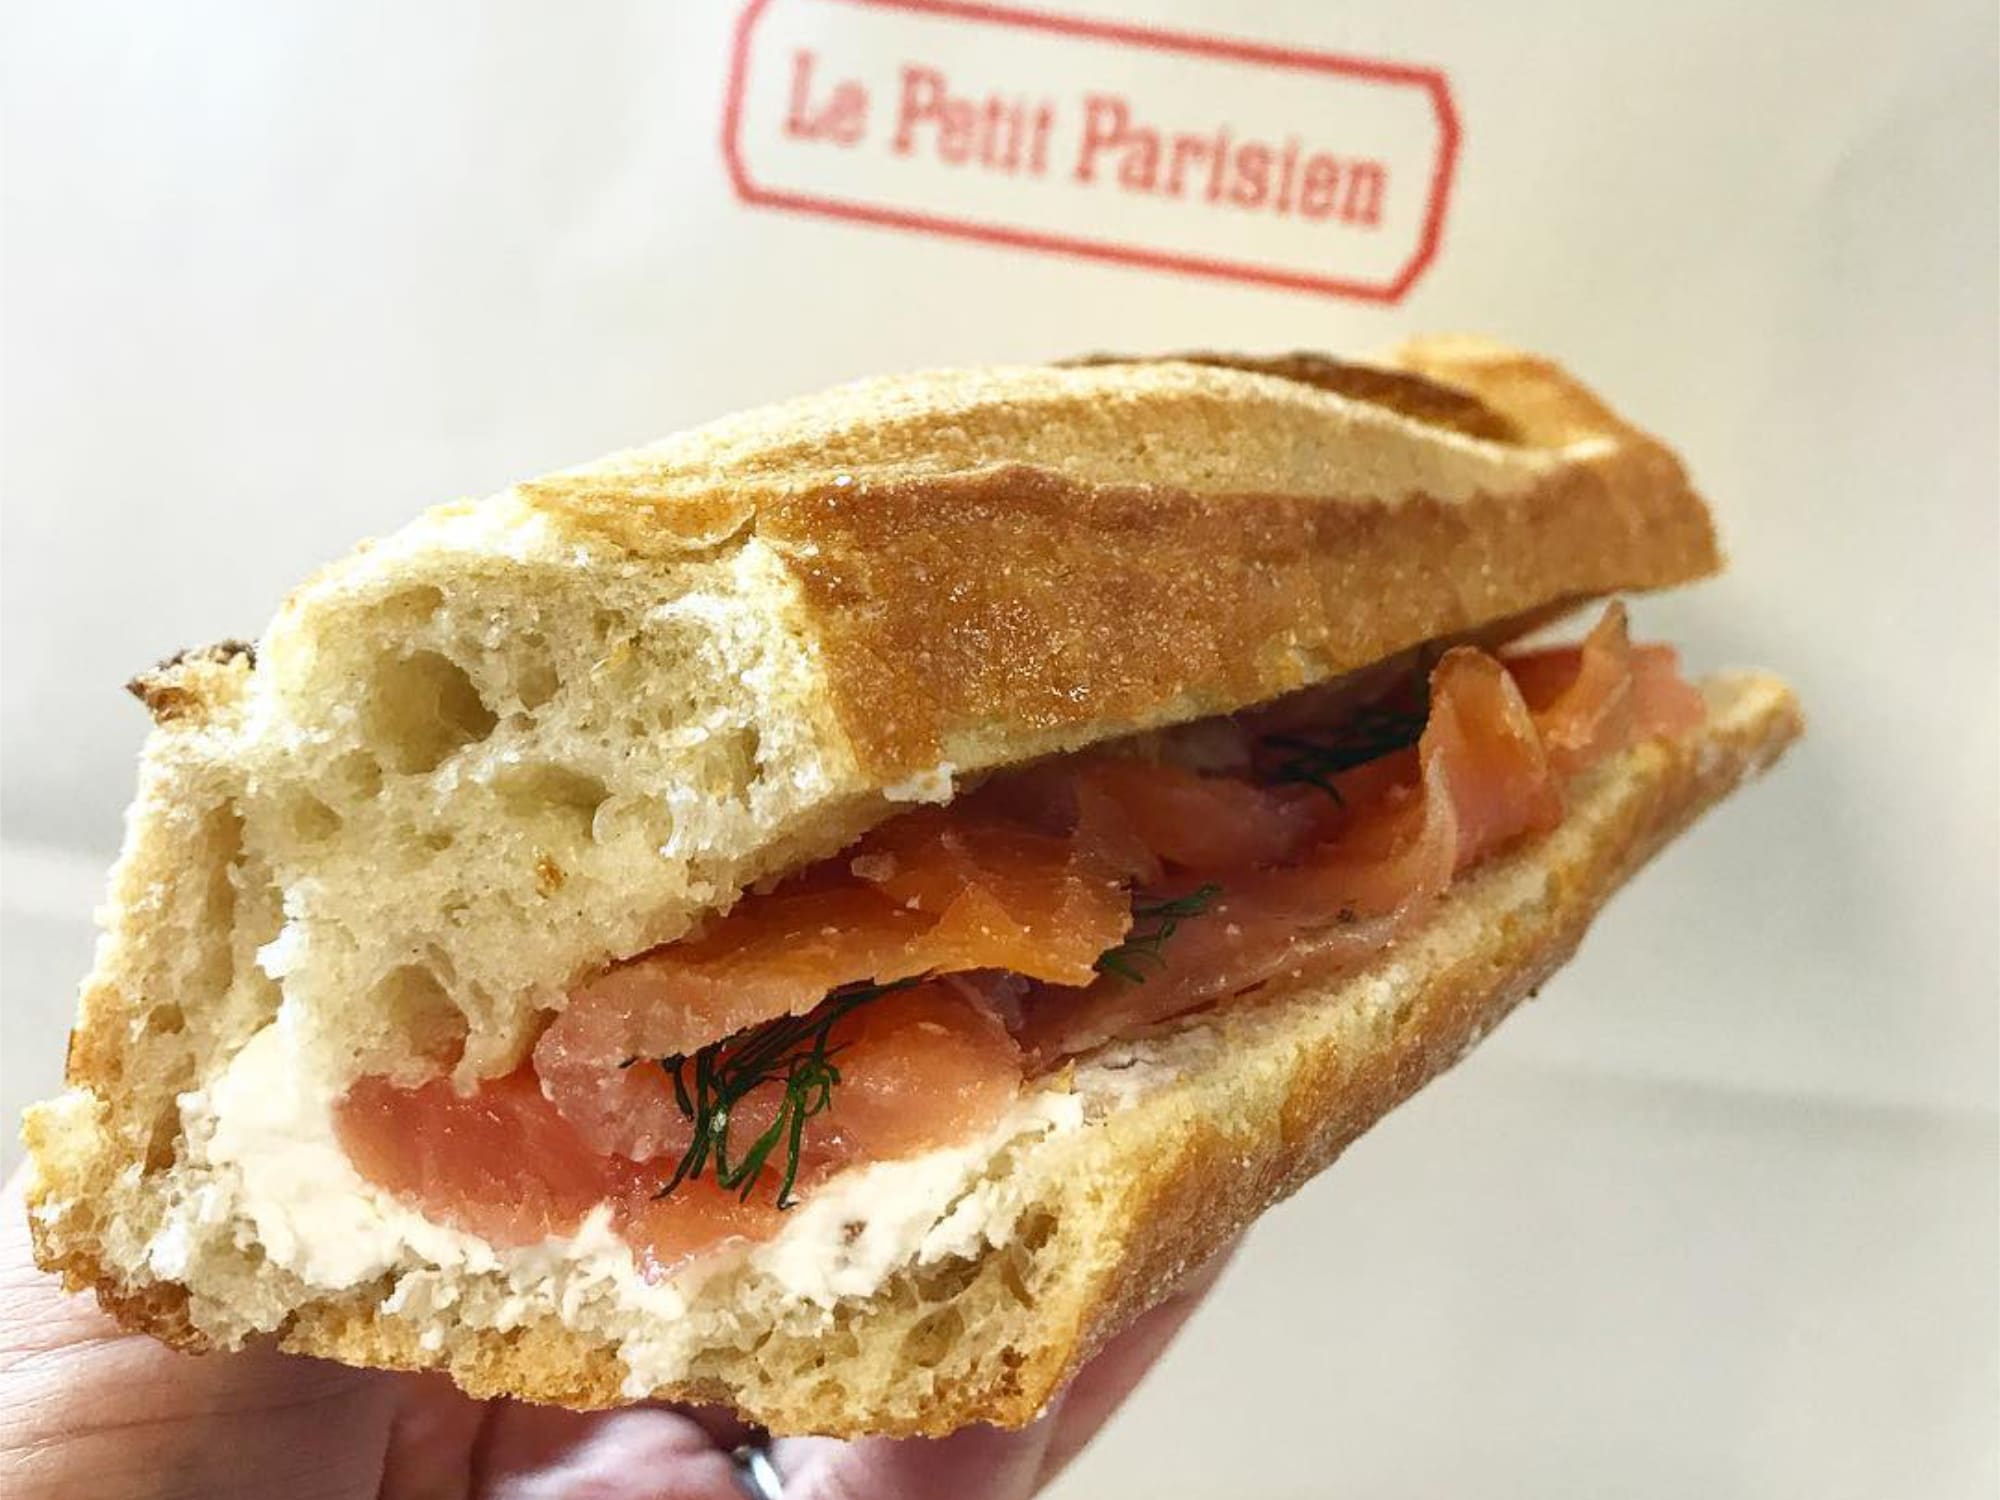 Le Petit Parisien's Jules Verne with smoked salmon, cream cheese, fresh dill